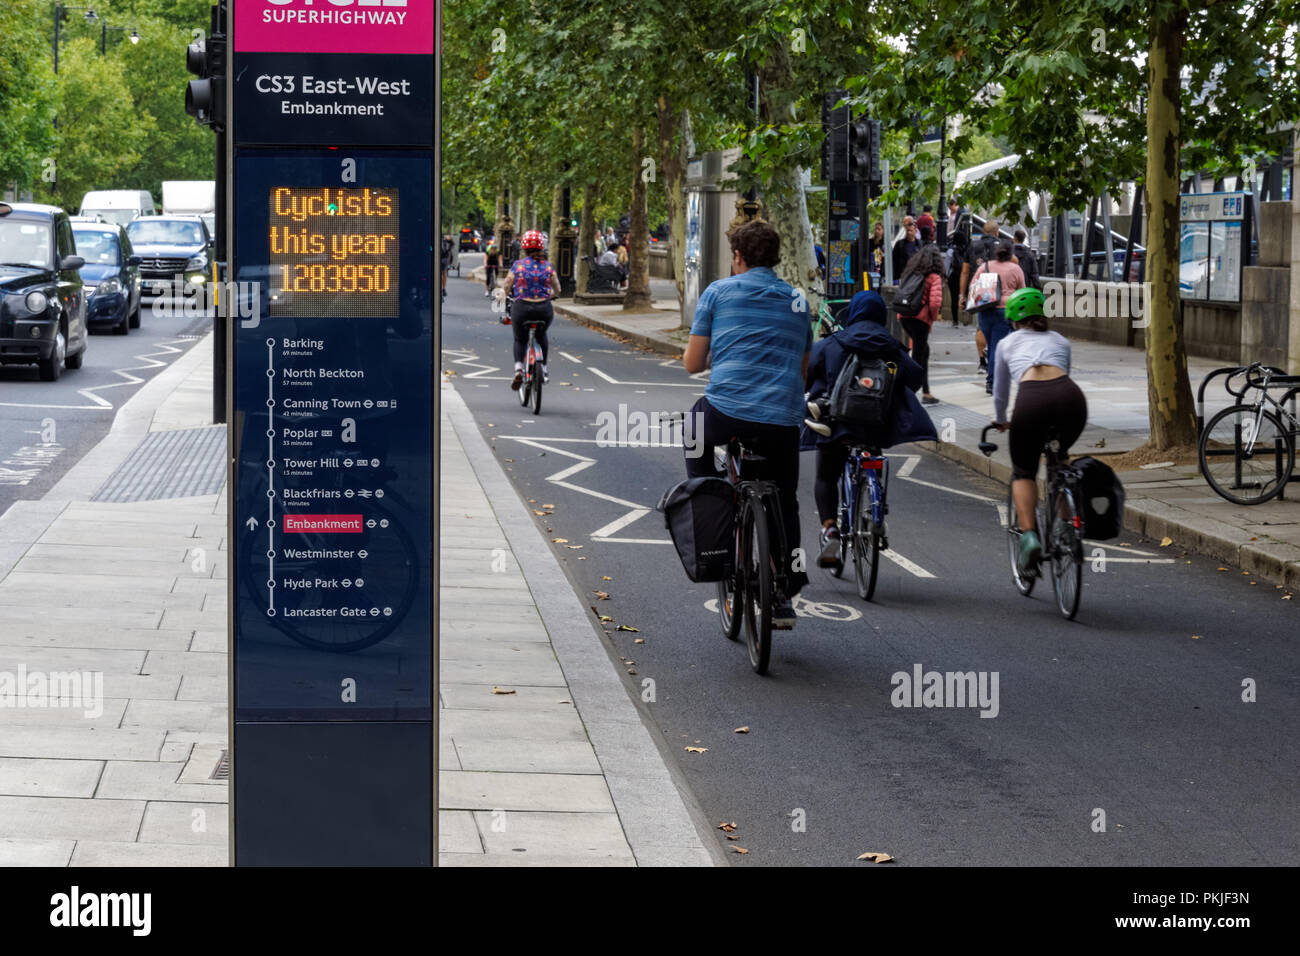 Cyclists passing Cycle Route CS3 Counter on Victoria Embankment, London England United Kingdom UK Stock Photo